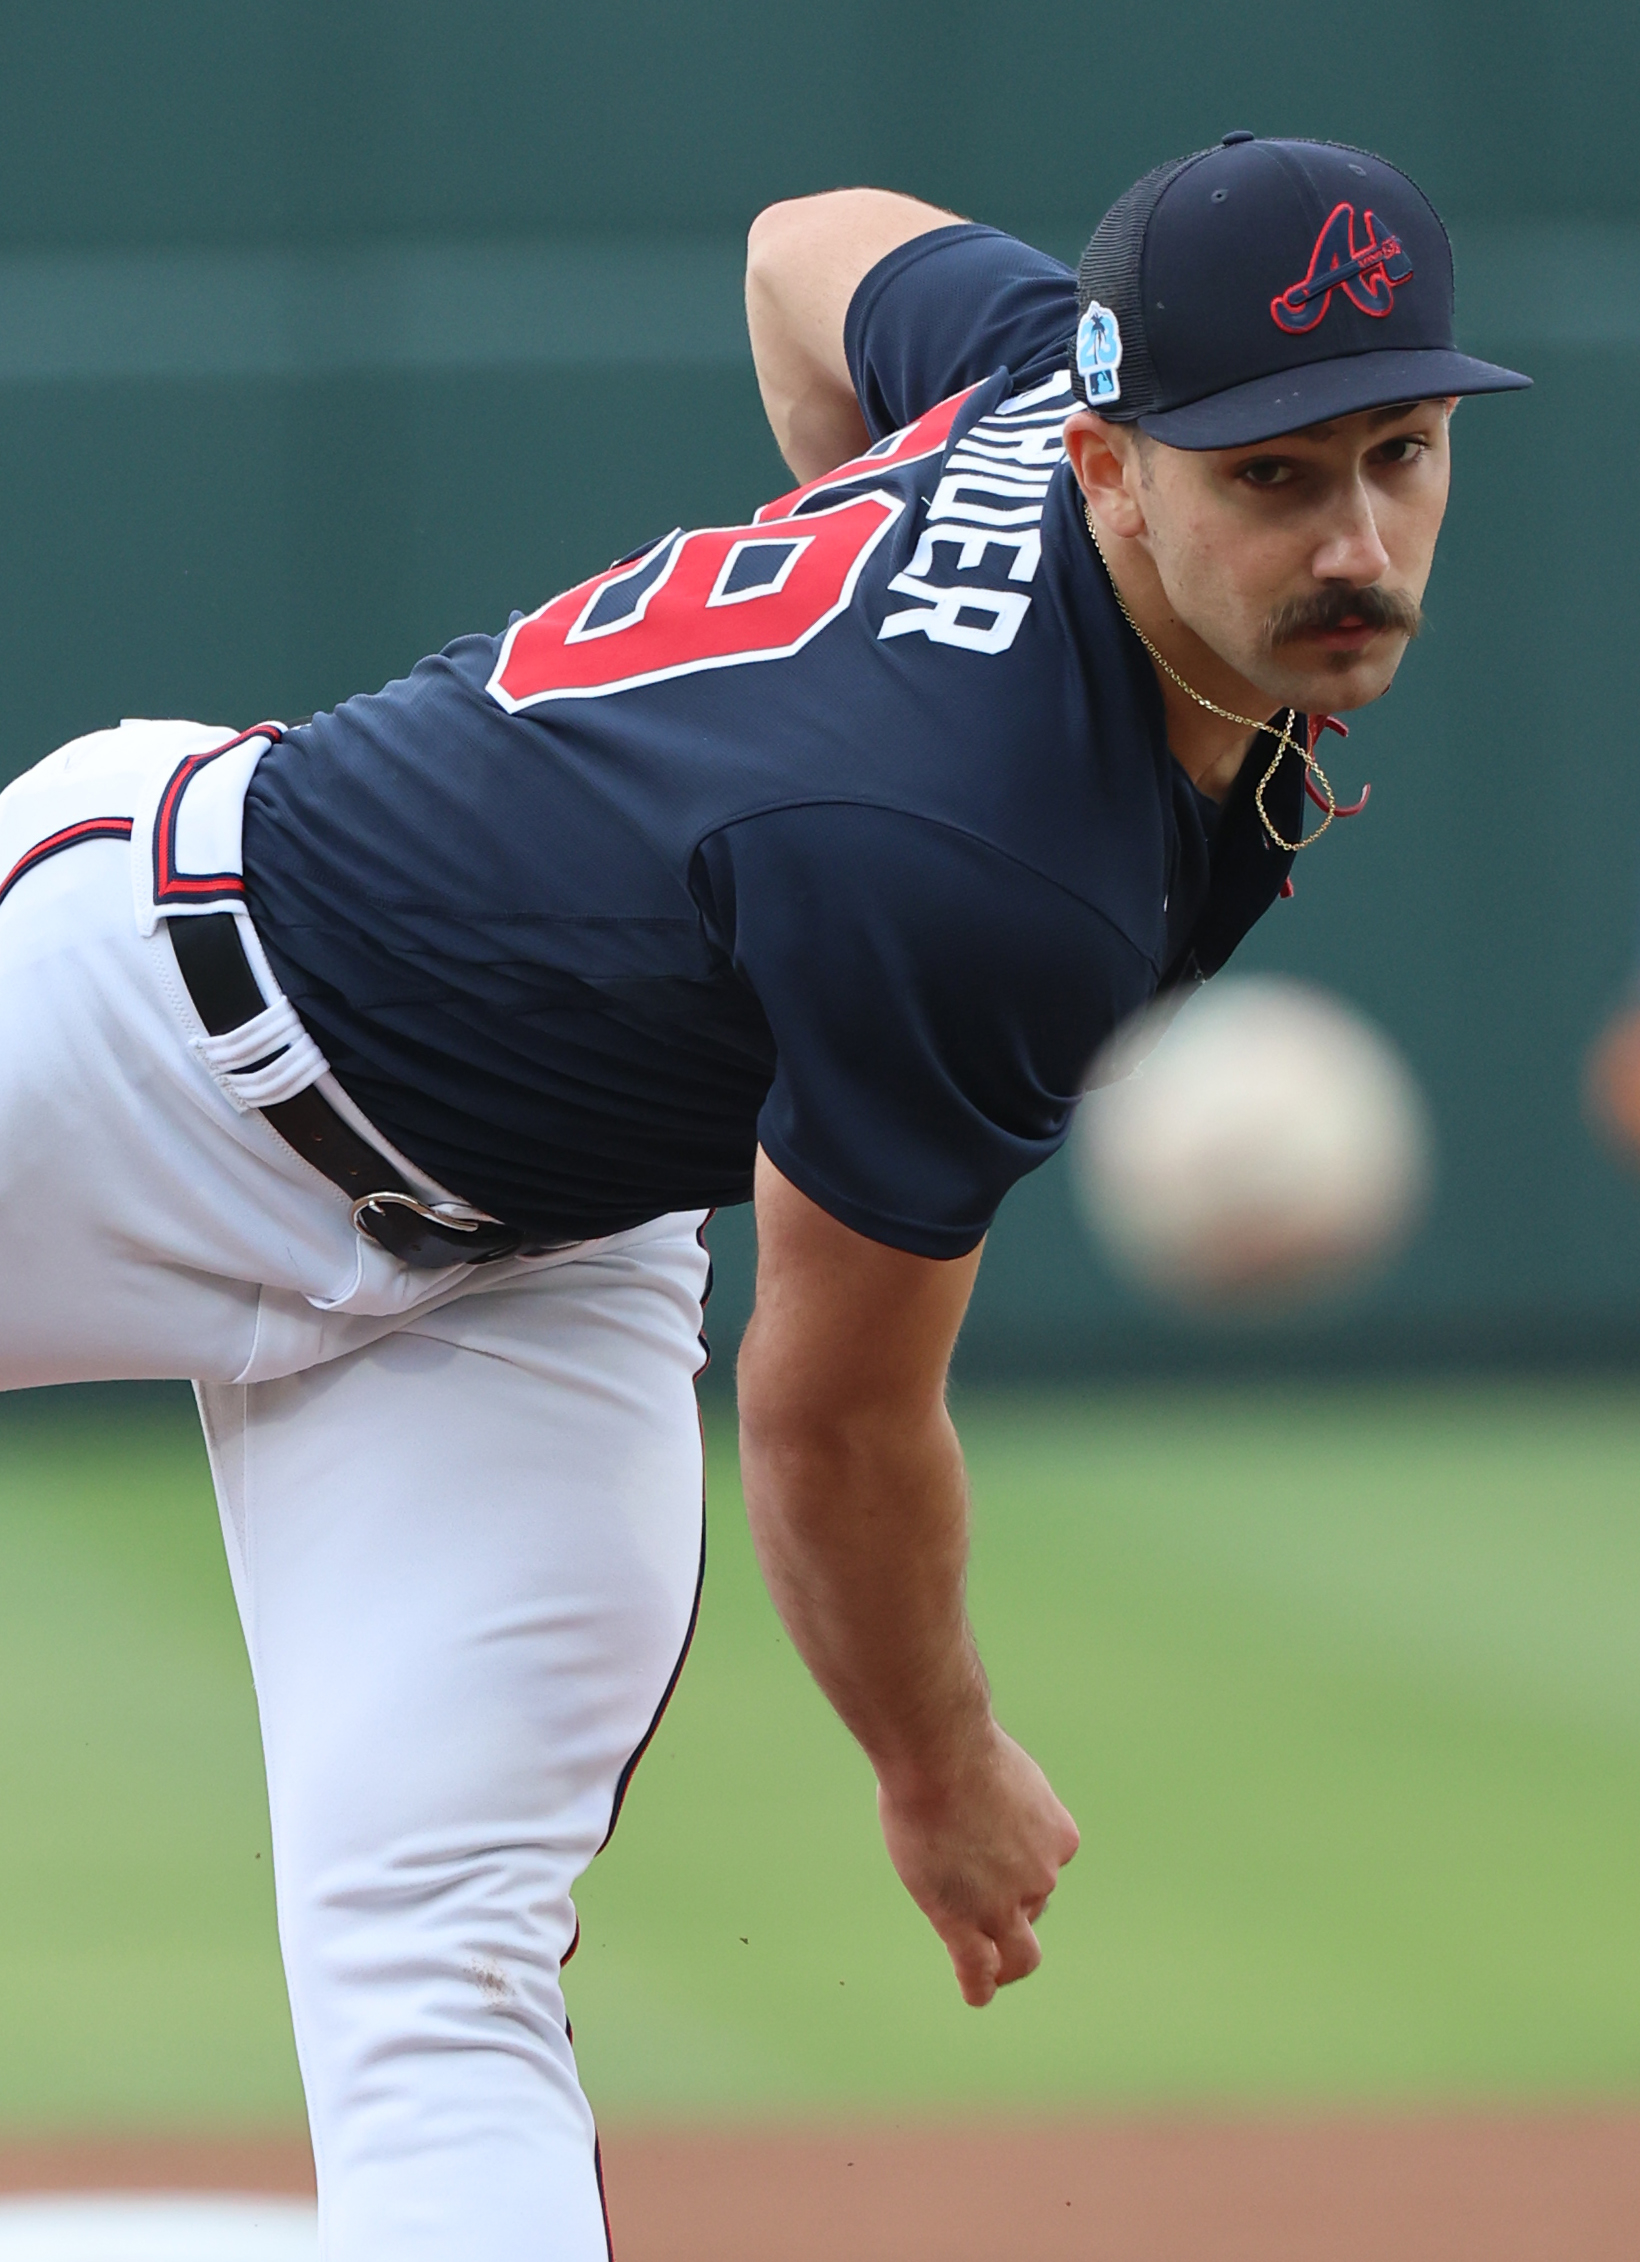 2023 Atlanta Braves players who could have a big year